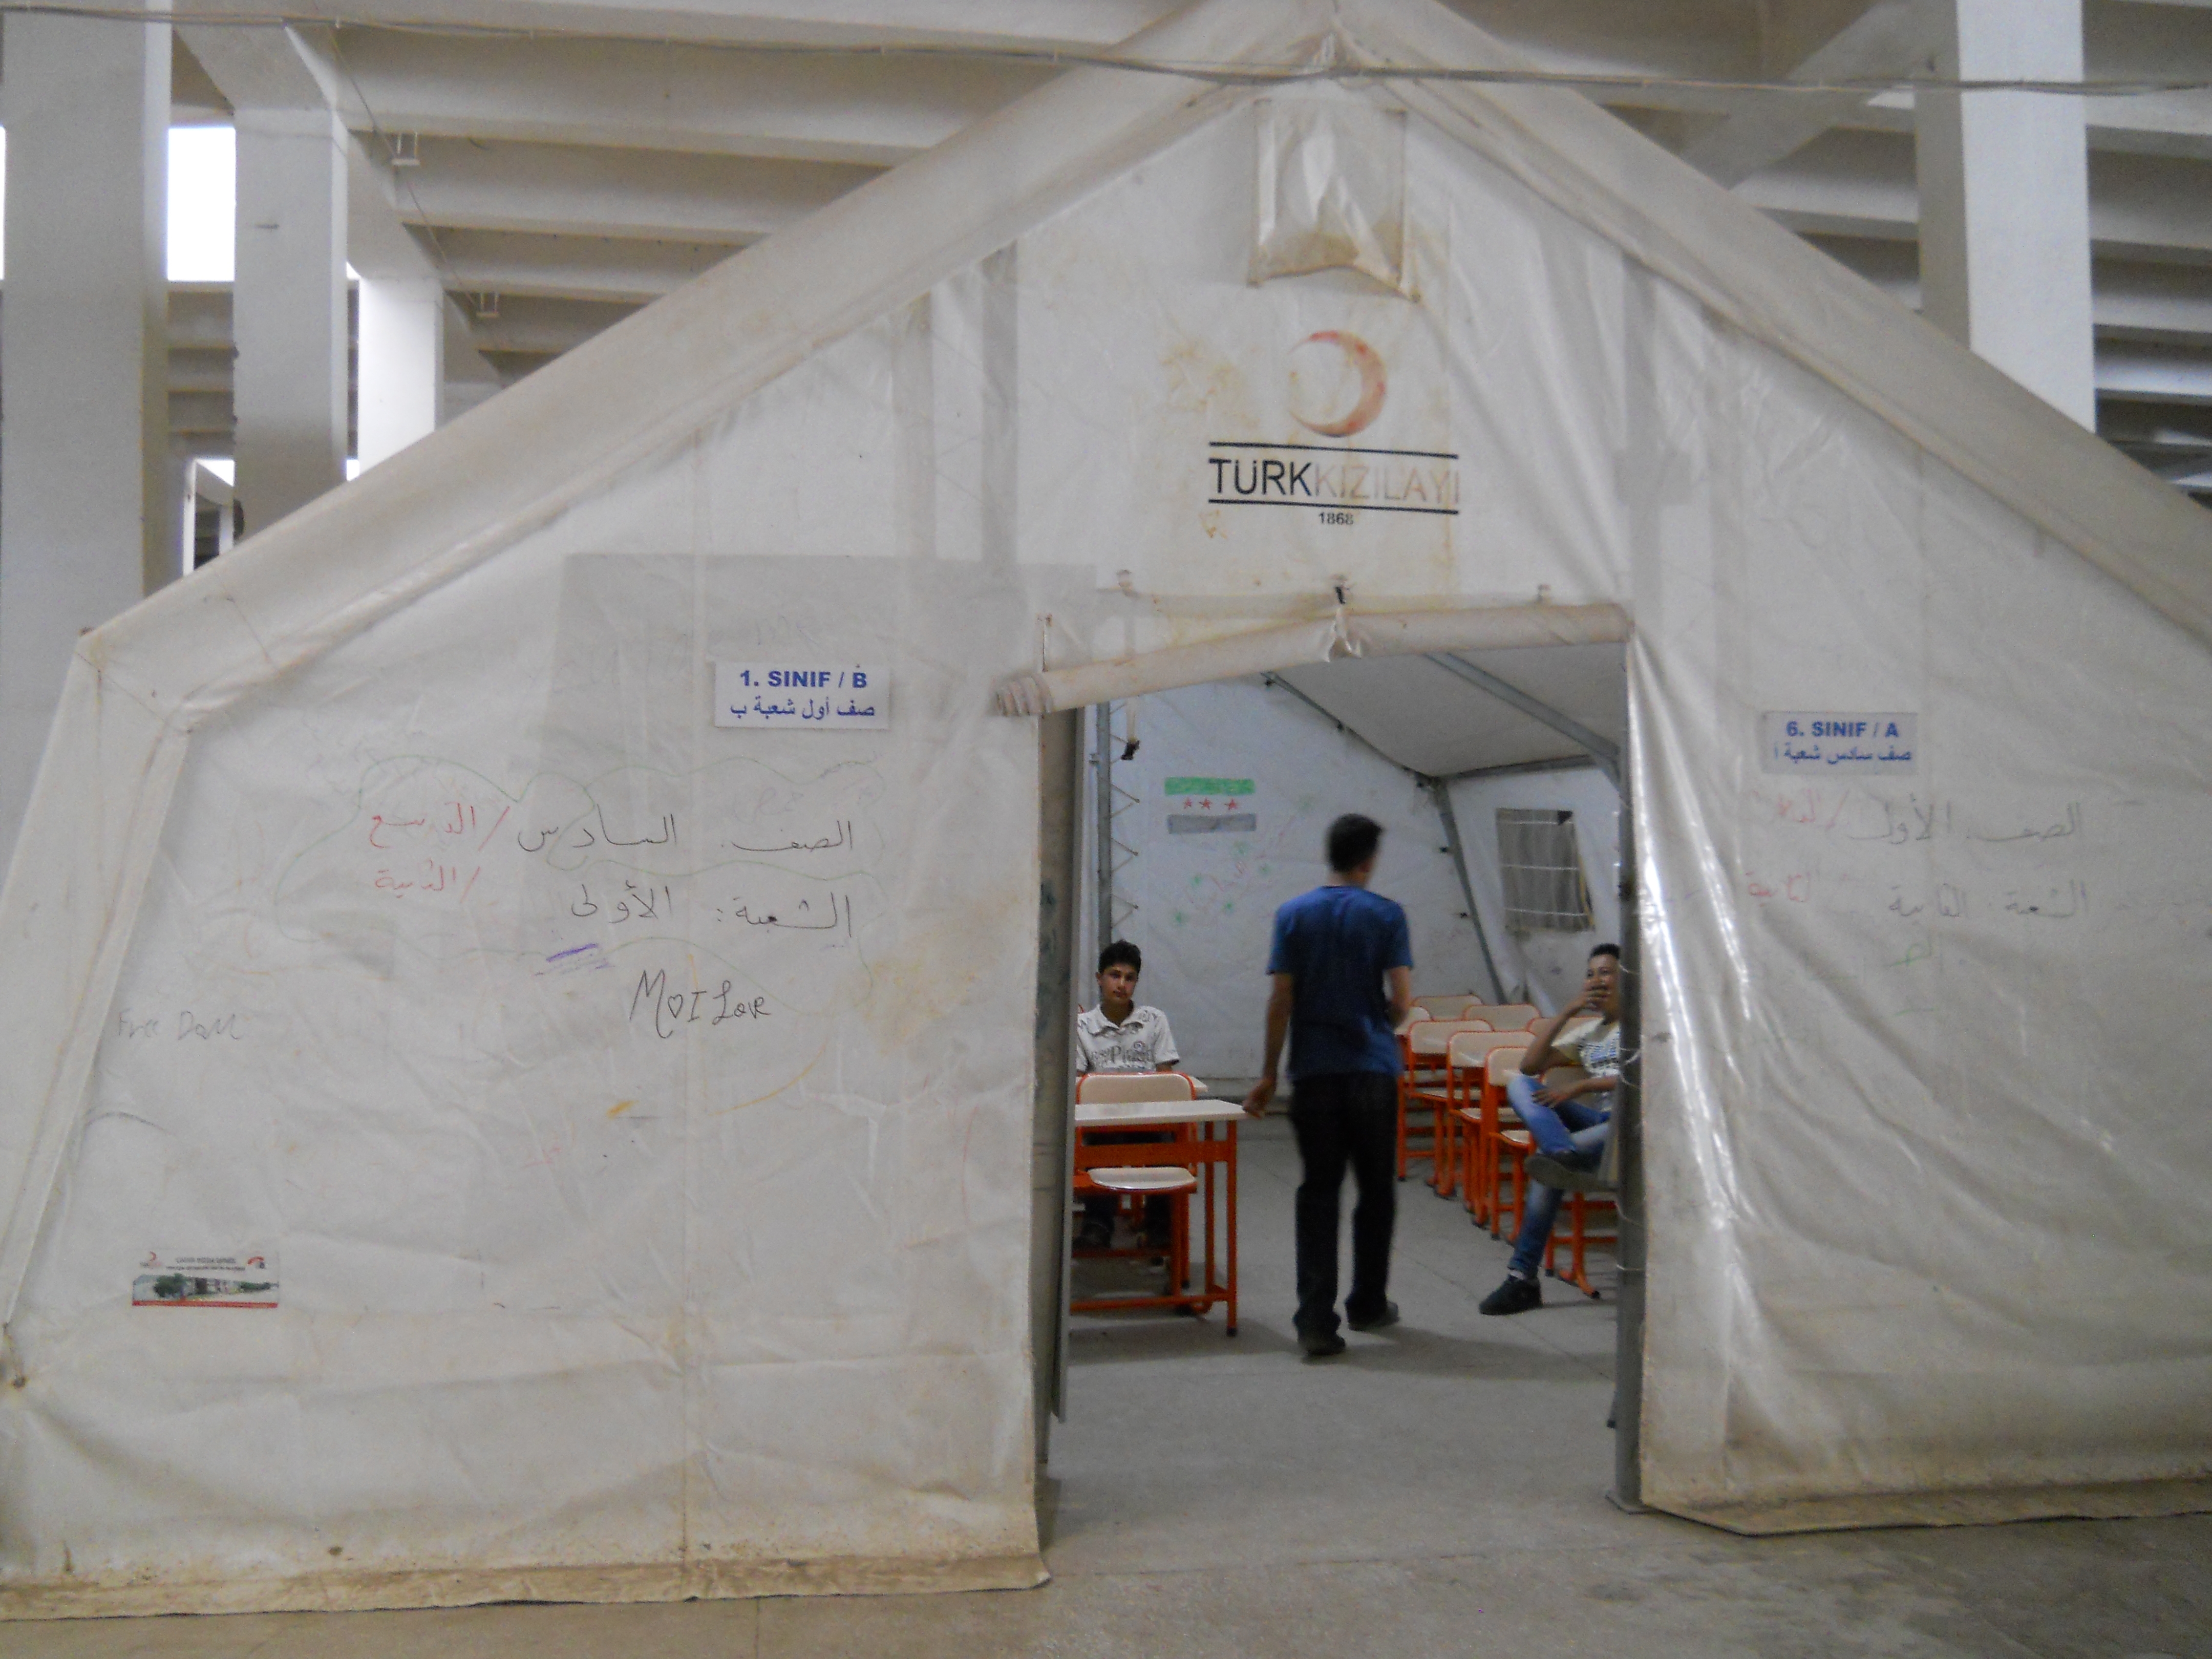 Volunteer Syrian teachers confer in a classroom tent erected in an abandoned warehouse at the Islahiye refugee camp in Turkey